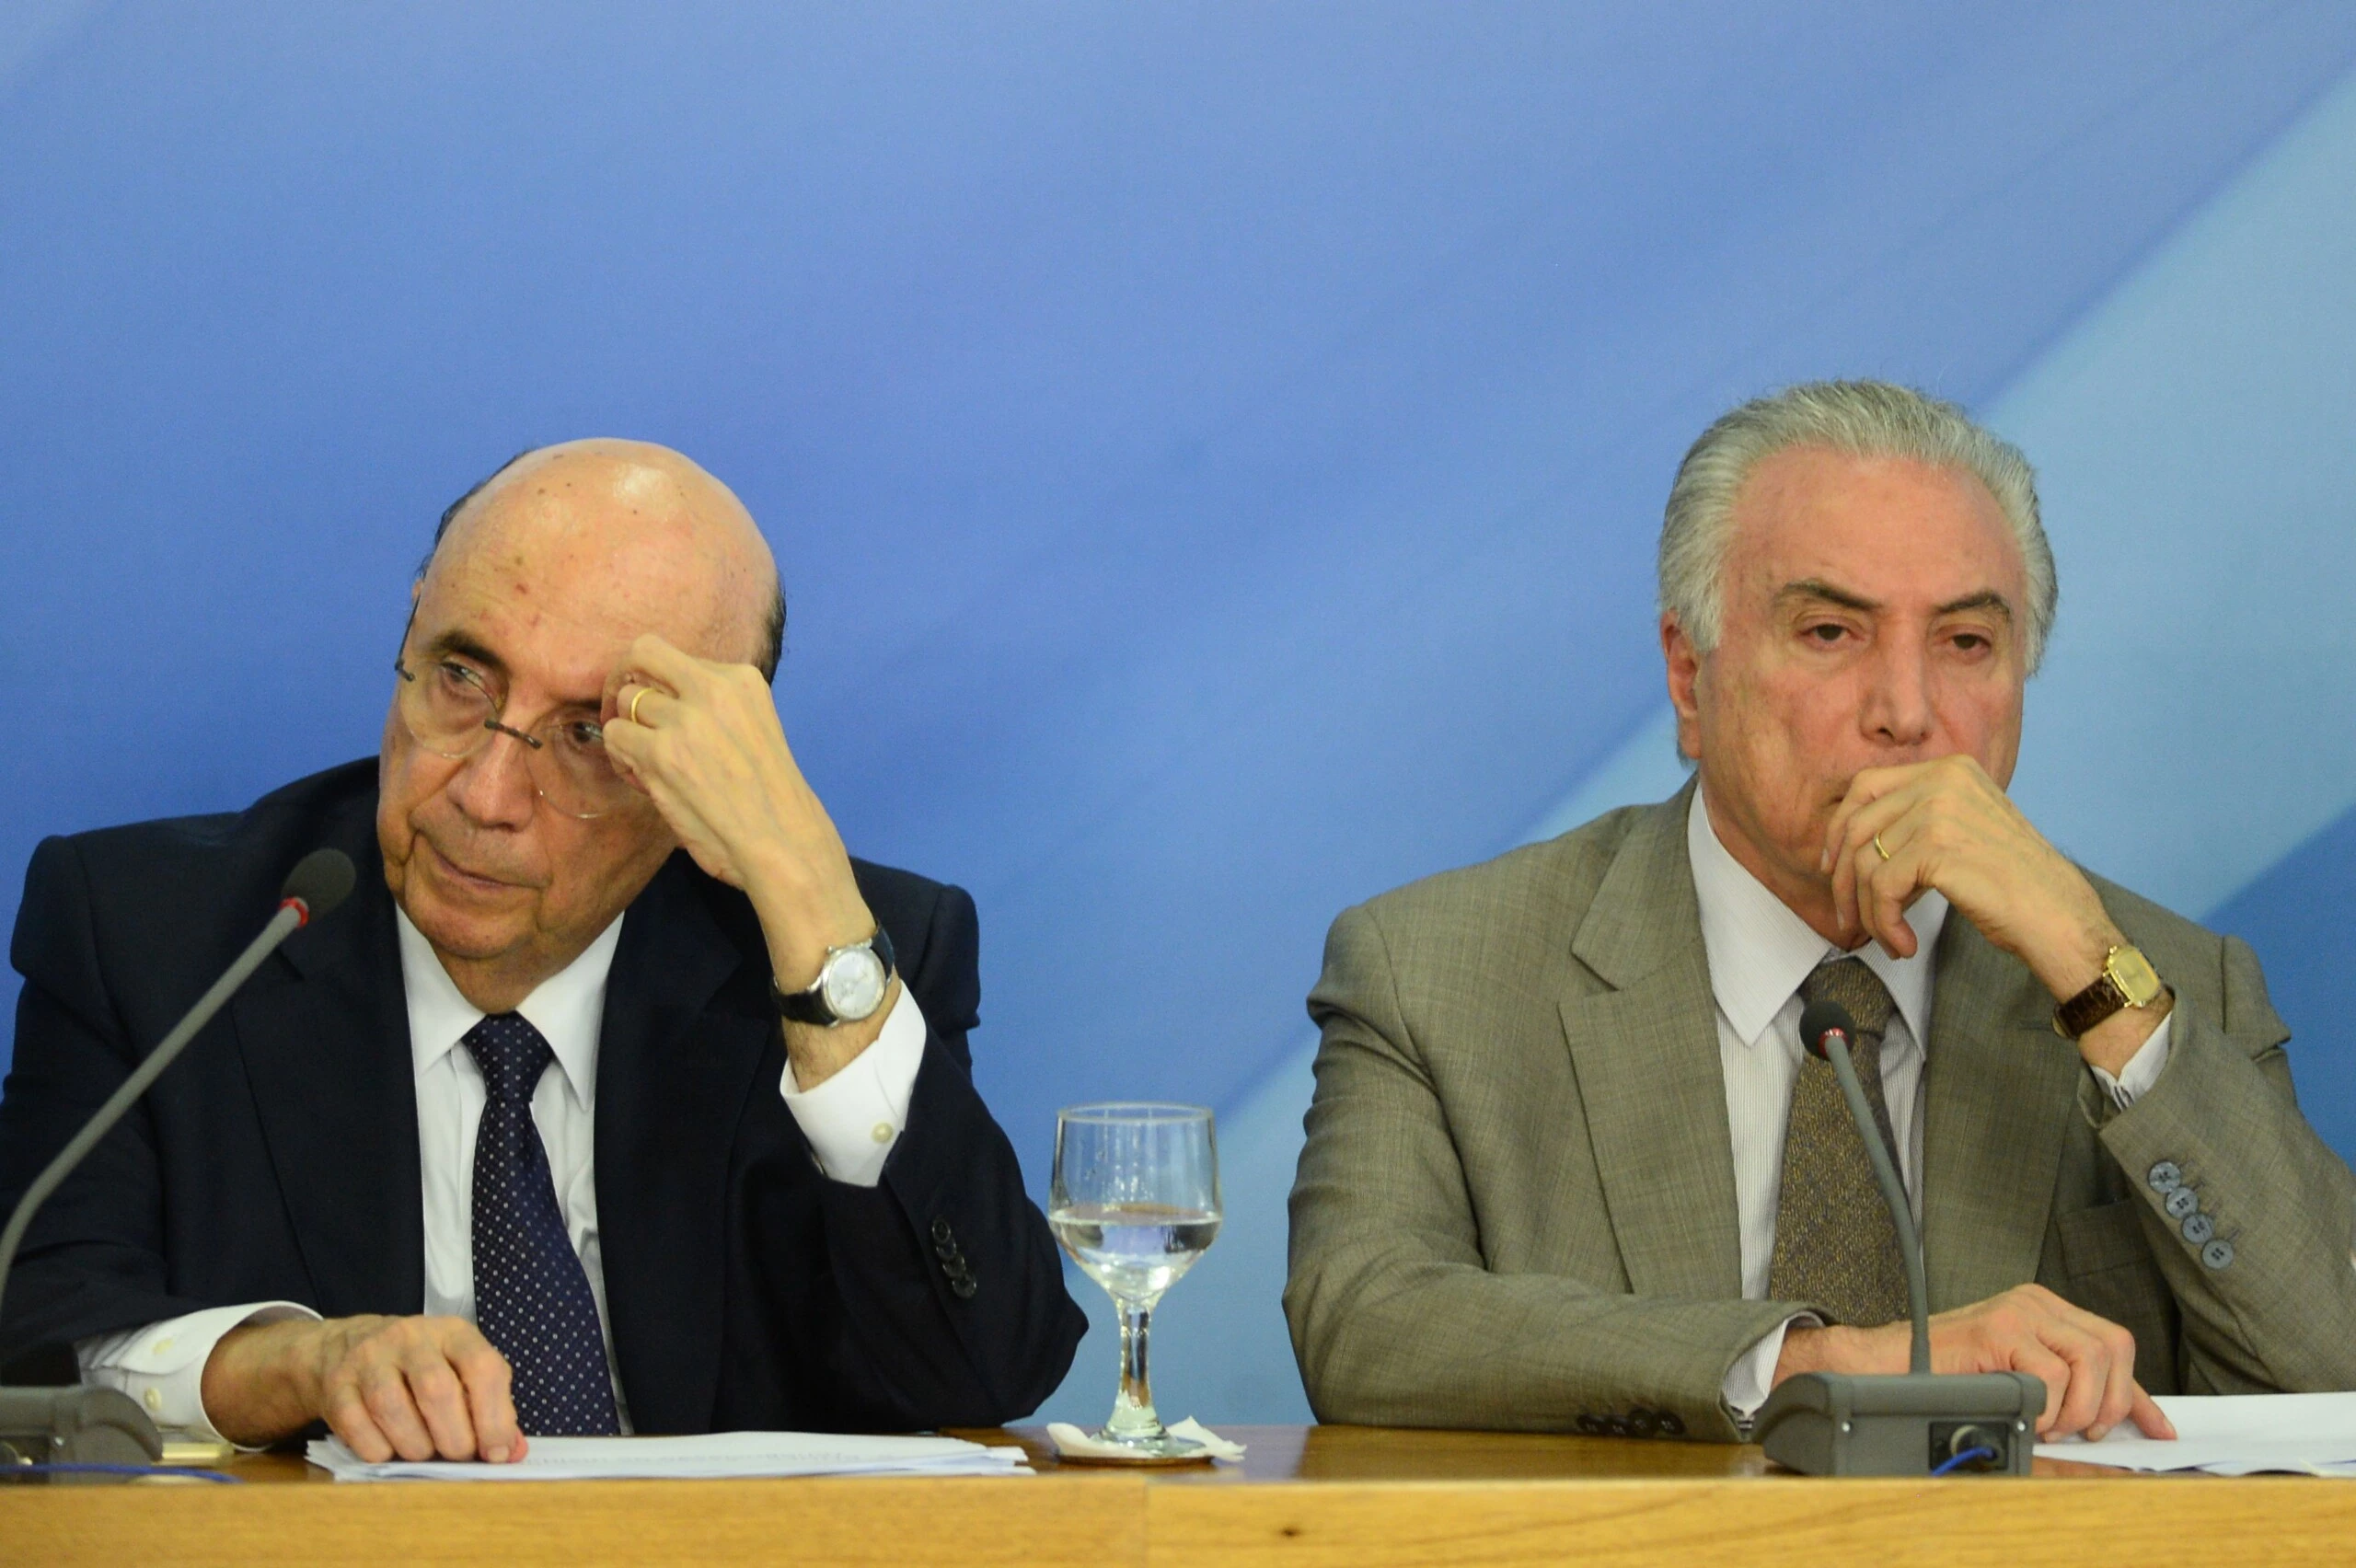 Brazilian President Michel Temer (R) and Finance Minister Henrique Meirelles (L) gesture during the announcement of new measures to stimulate the economy, in the Planalto Palace on December 15, 2016 in Brasilia. / AFP / ANDRESSA ANHOLETE        (Photo credit should read ANDRESSA ANHOLETE/AFP/Getty Images)